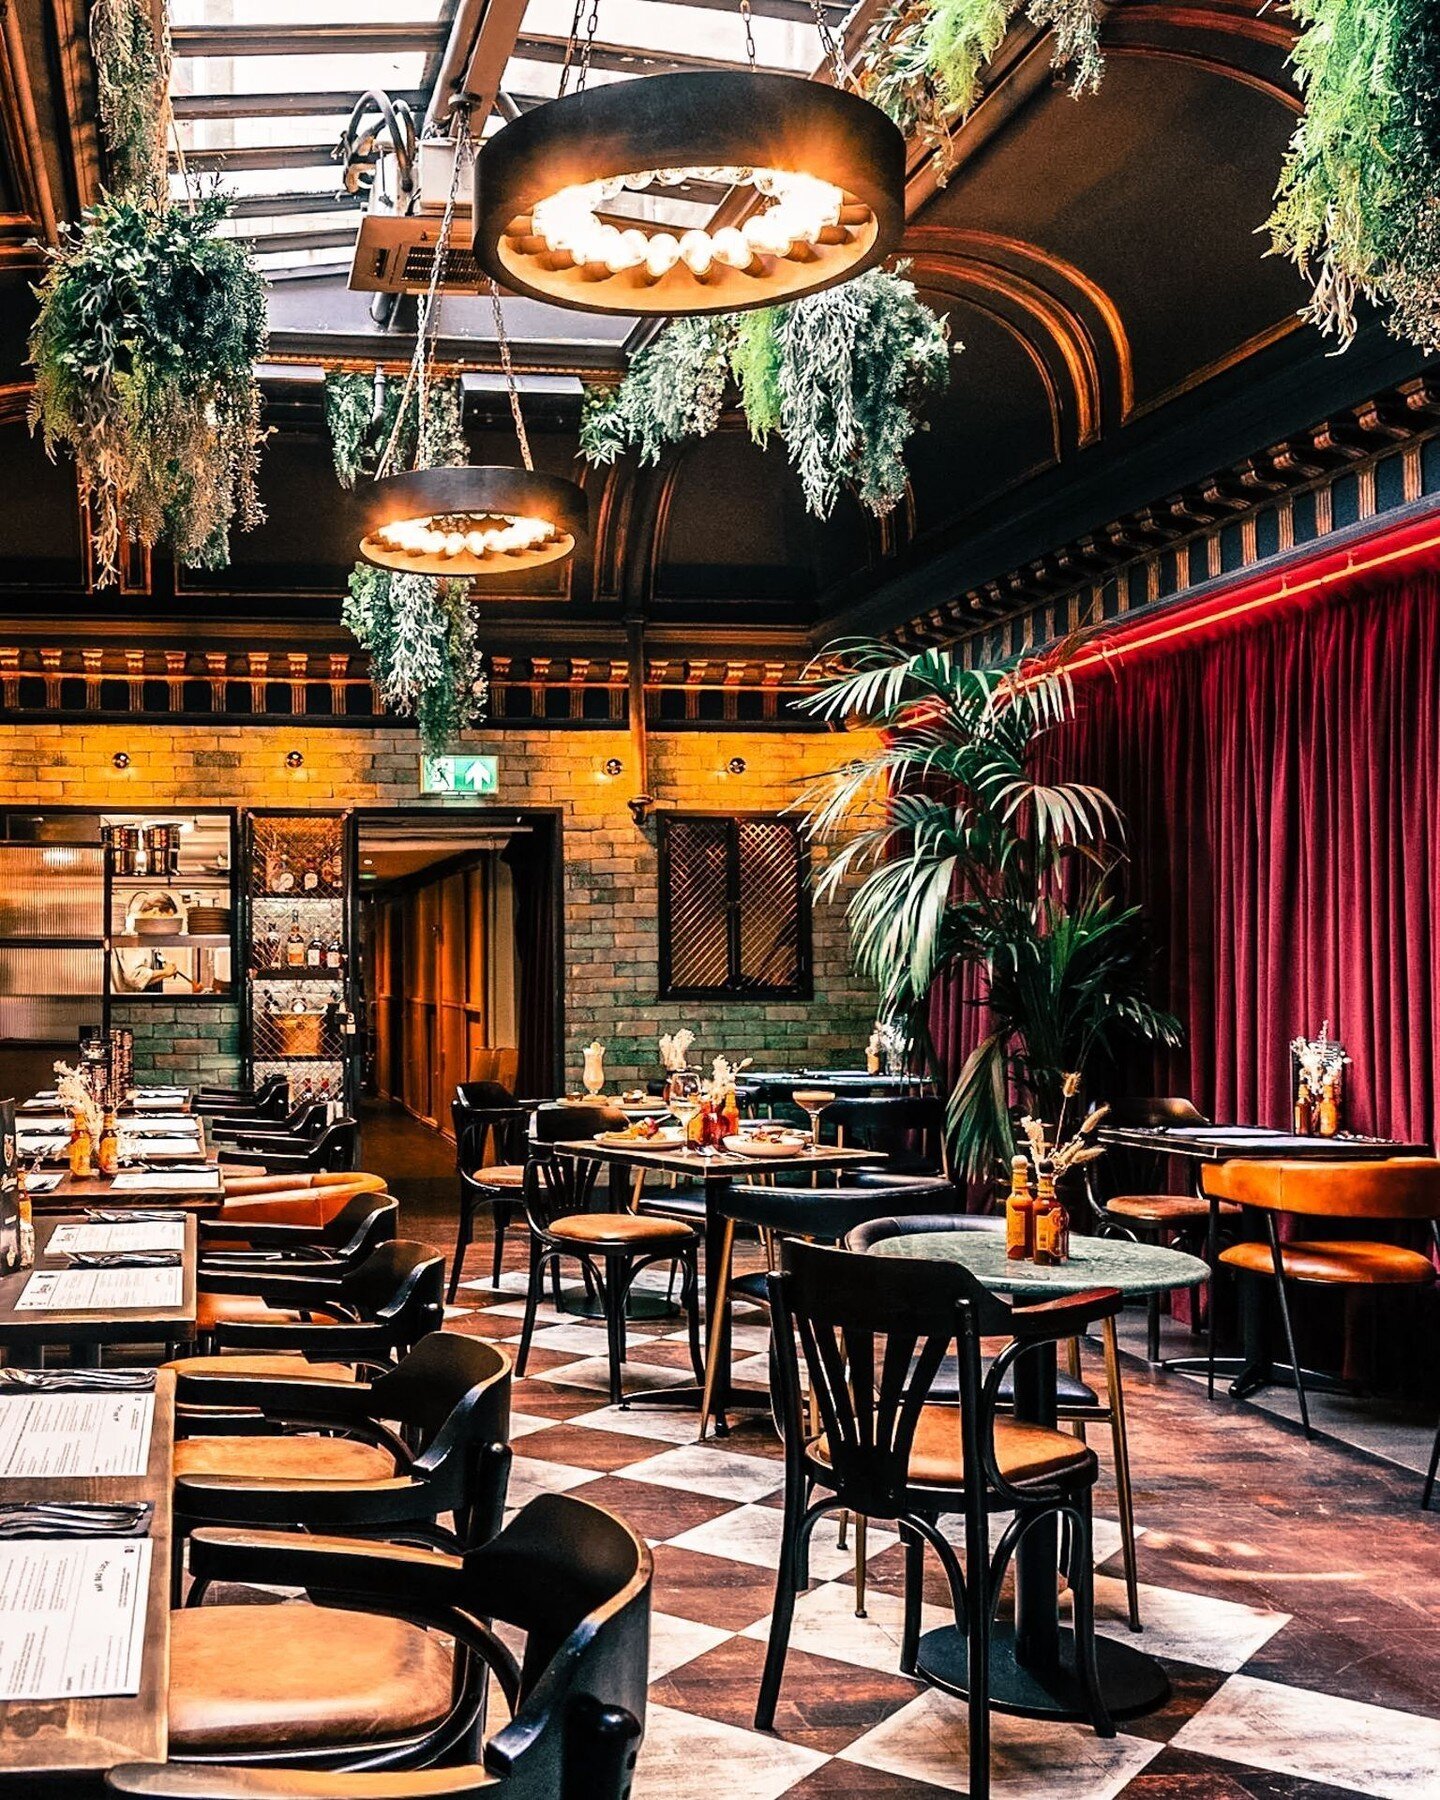 This bar and restaurant, inspired by Latin culture, combines an equal blend of luxurious elements, reclaimed materials, and dramatic ambience. 

#commercialinteriordesign #commercialinteriors #hospitalitydesigner #shopfitout #instainteriordesign #res